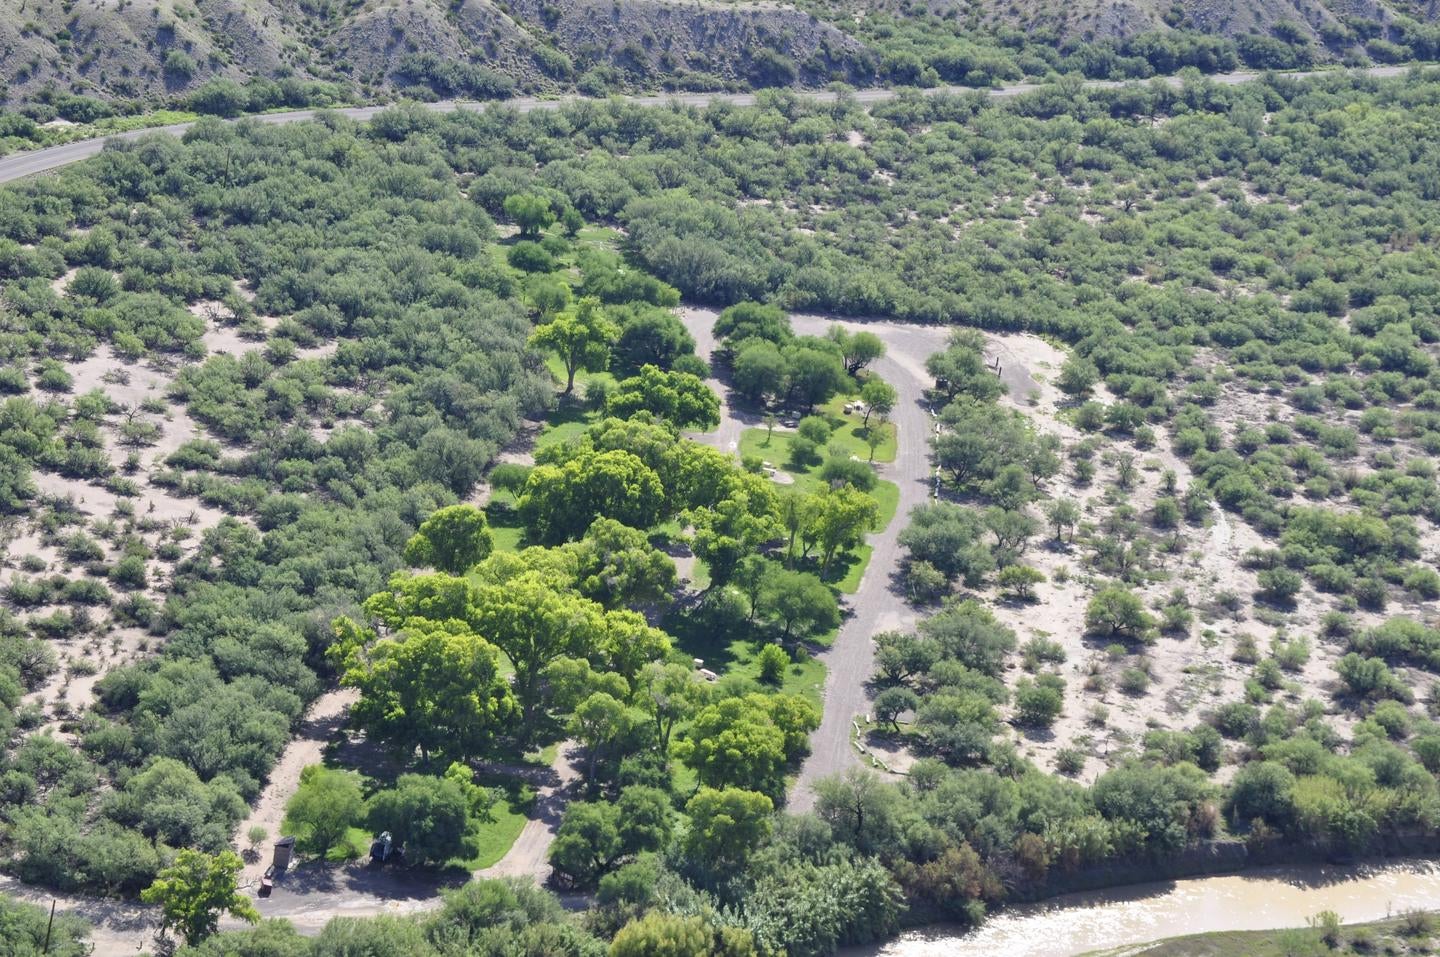 Aerial view of Cottonwood Campground, bright green trees amidst the low desert, riparian area



Aerial view of Cottonwood Campground

Credit: NPS